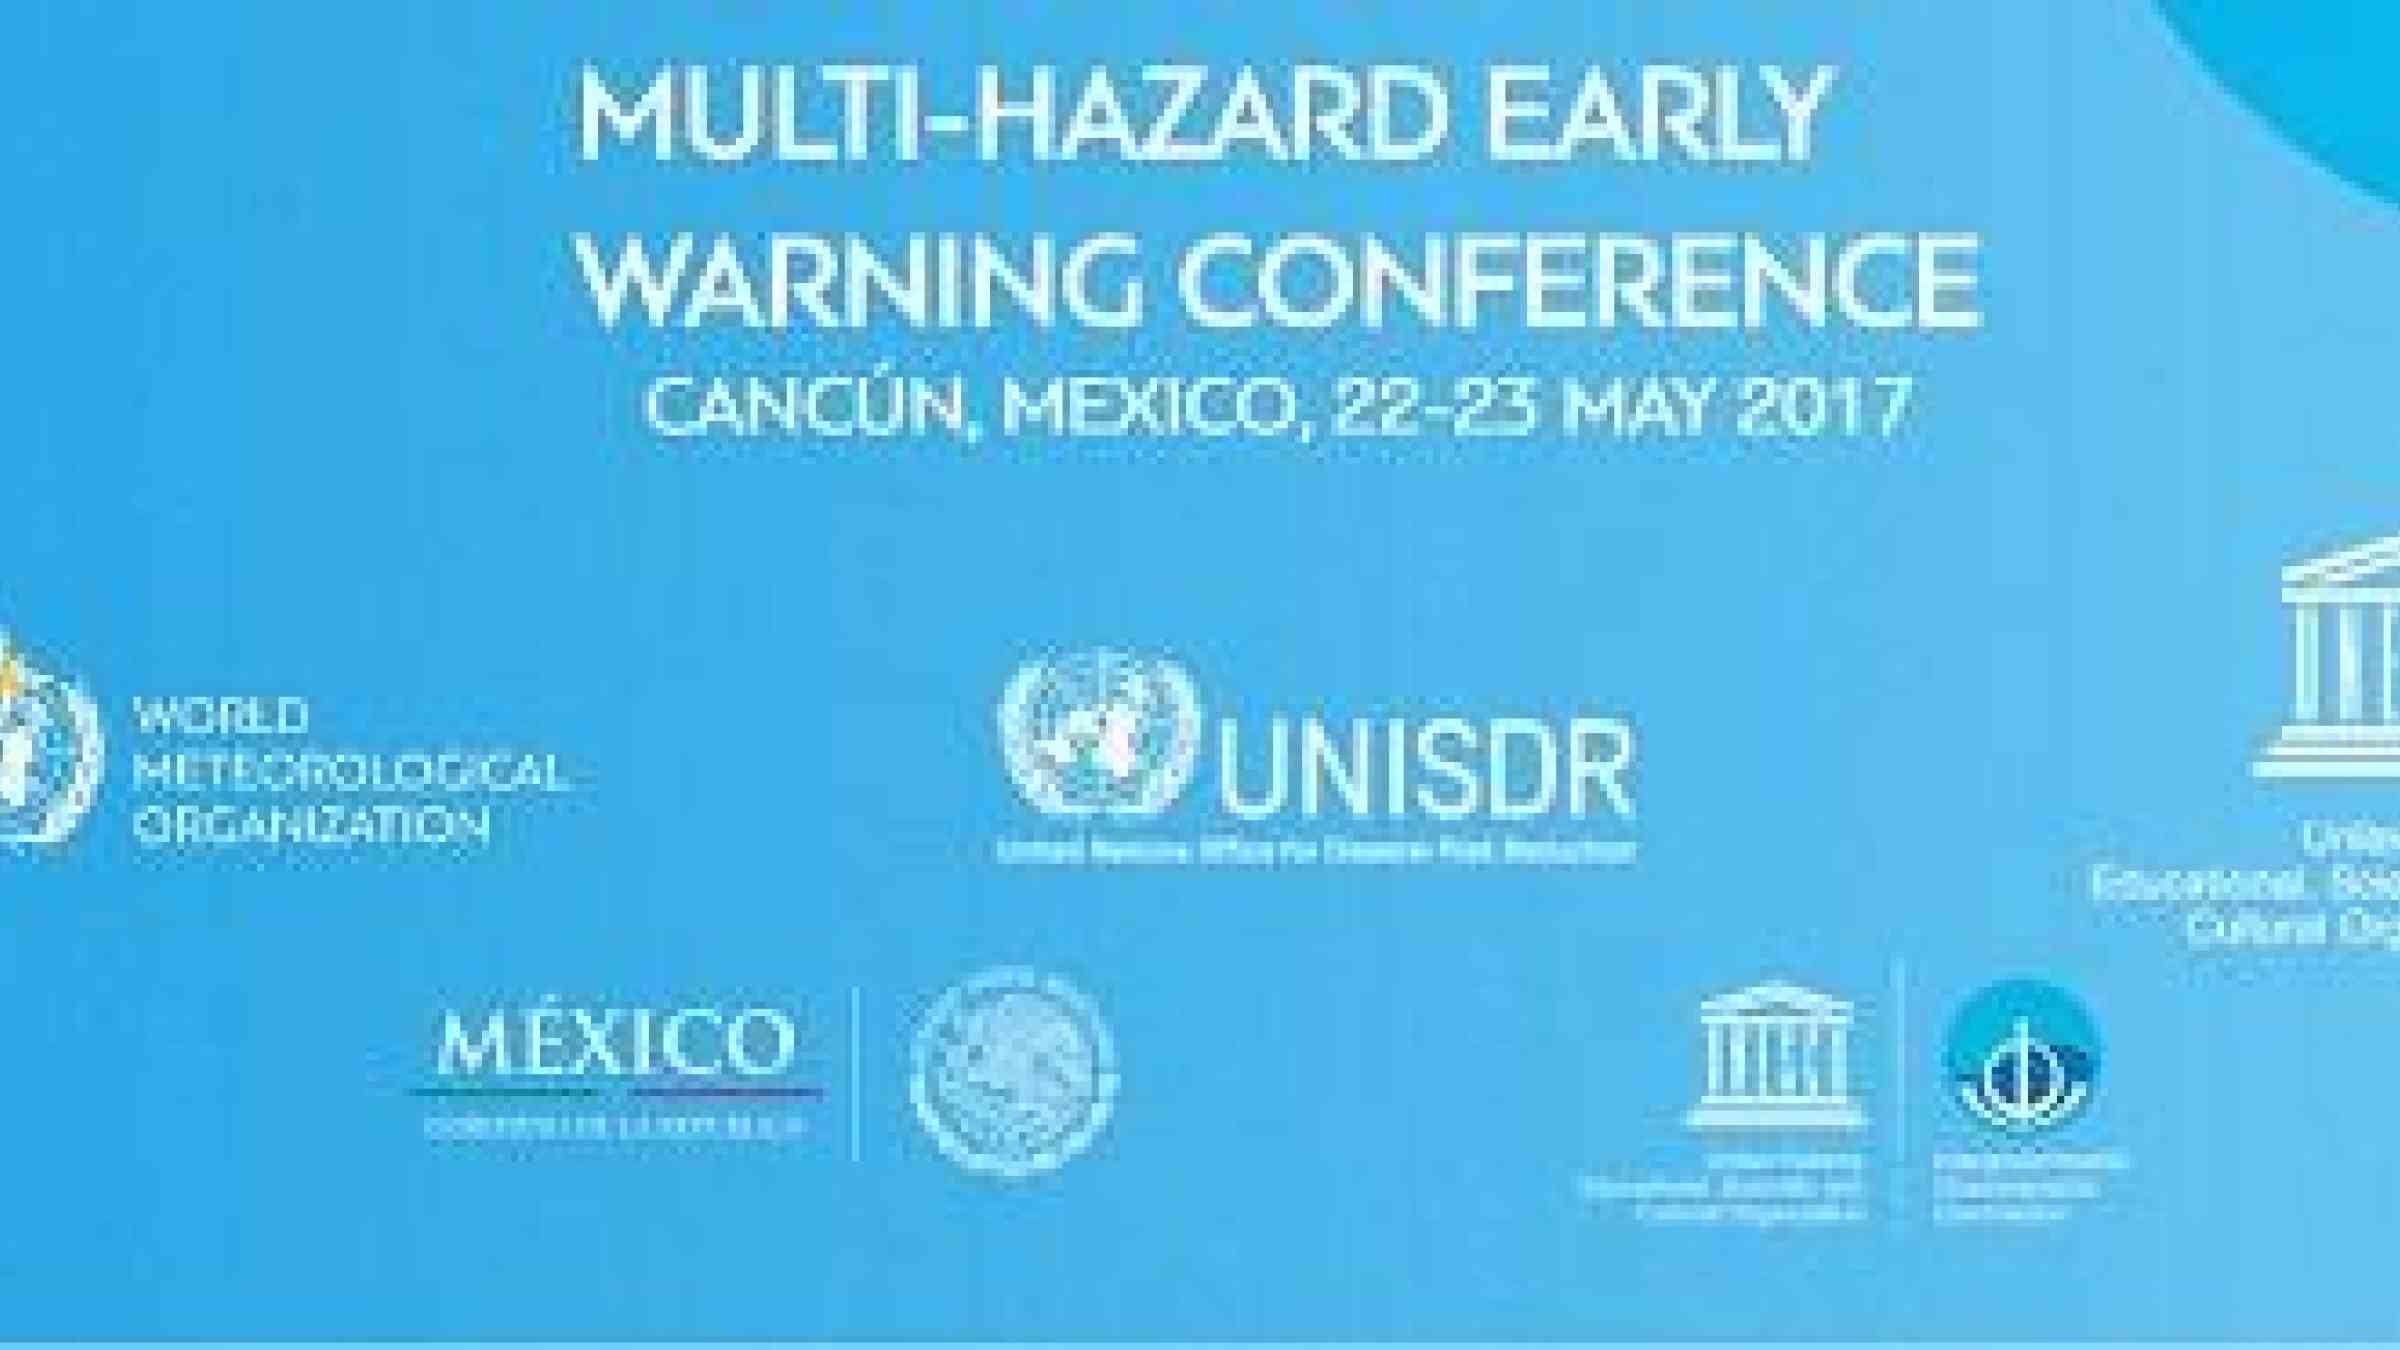 The 22-23 May Multi-Hazard Early Warning Conference feeds into the 2017 Global Platform for Disaster Risk Reduction, also taking place in Cancun, Mexico from 22 to 26 May